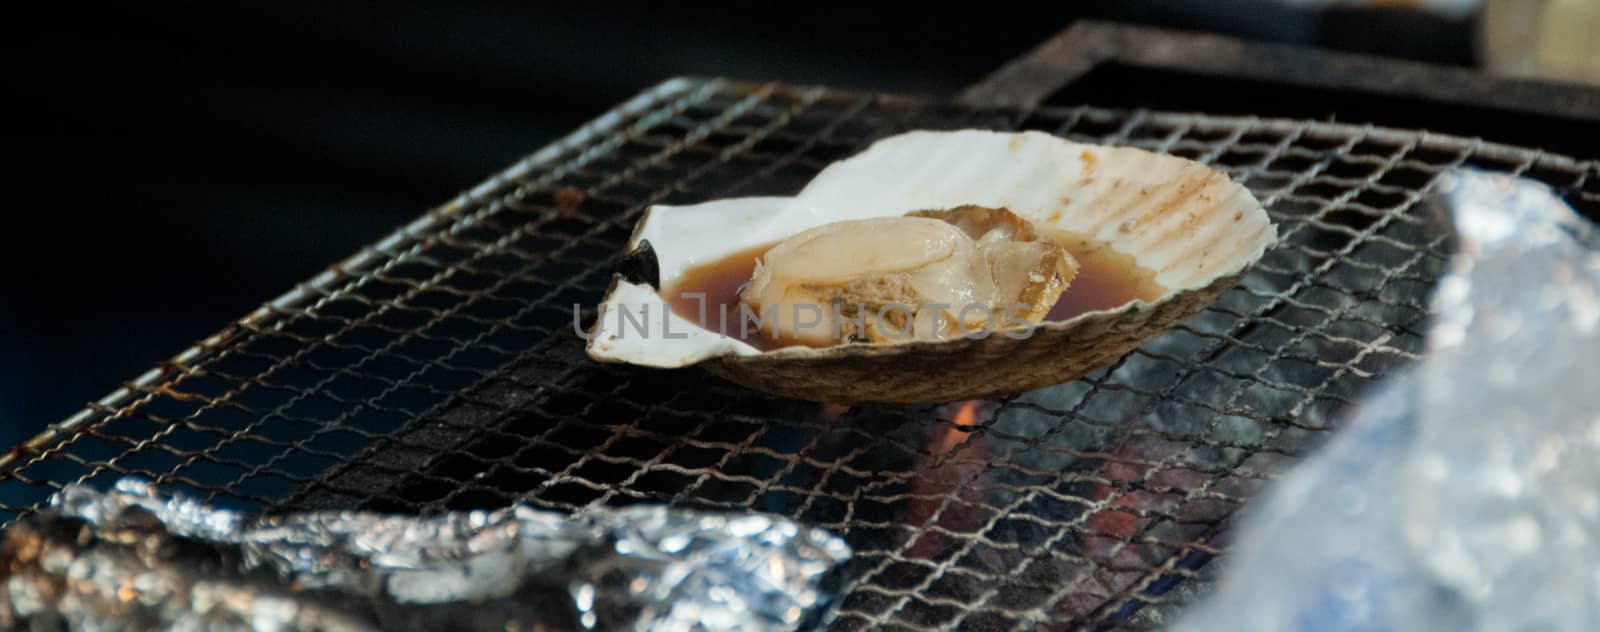 Grilled giant Hokkaido scallop on charcoal cook stove